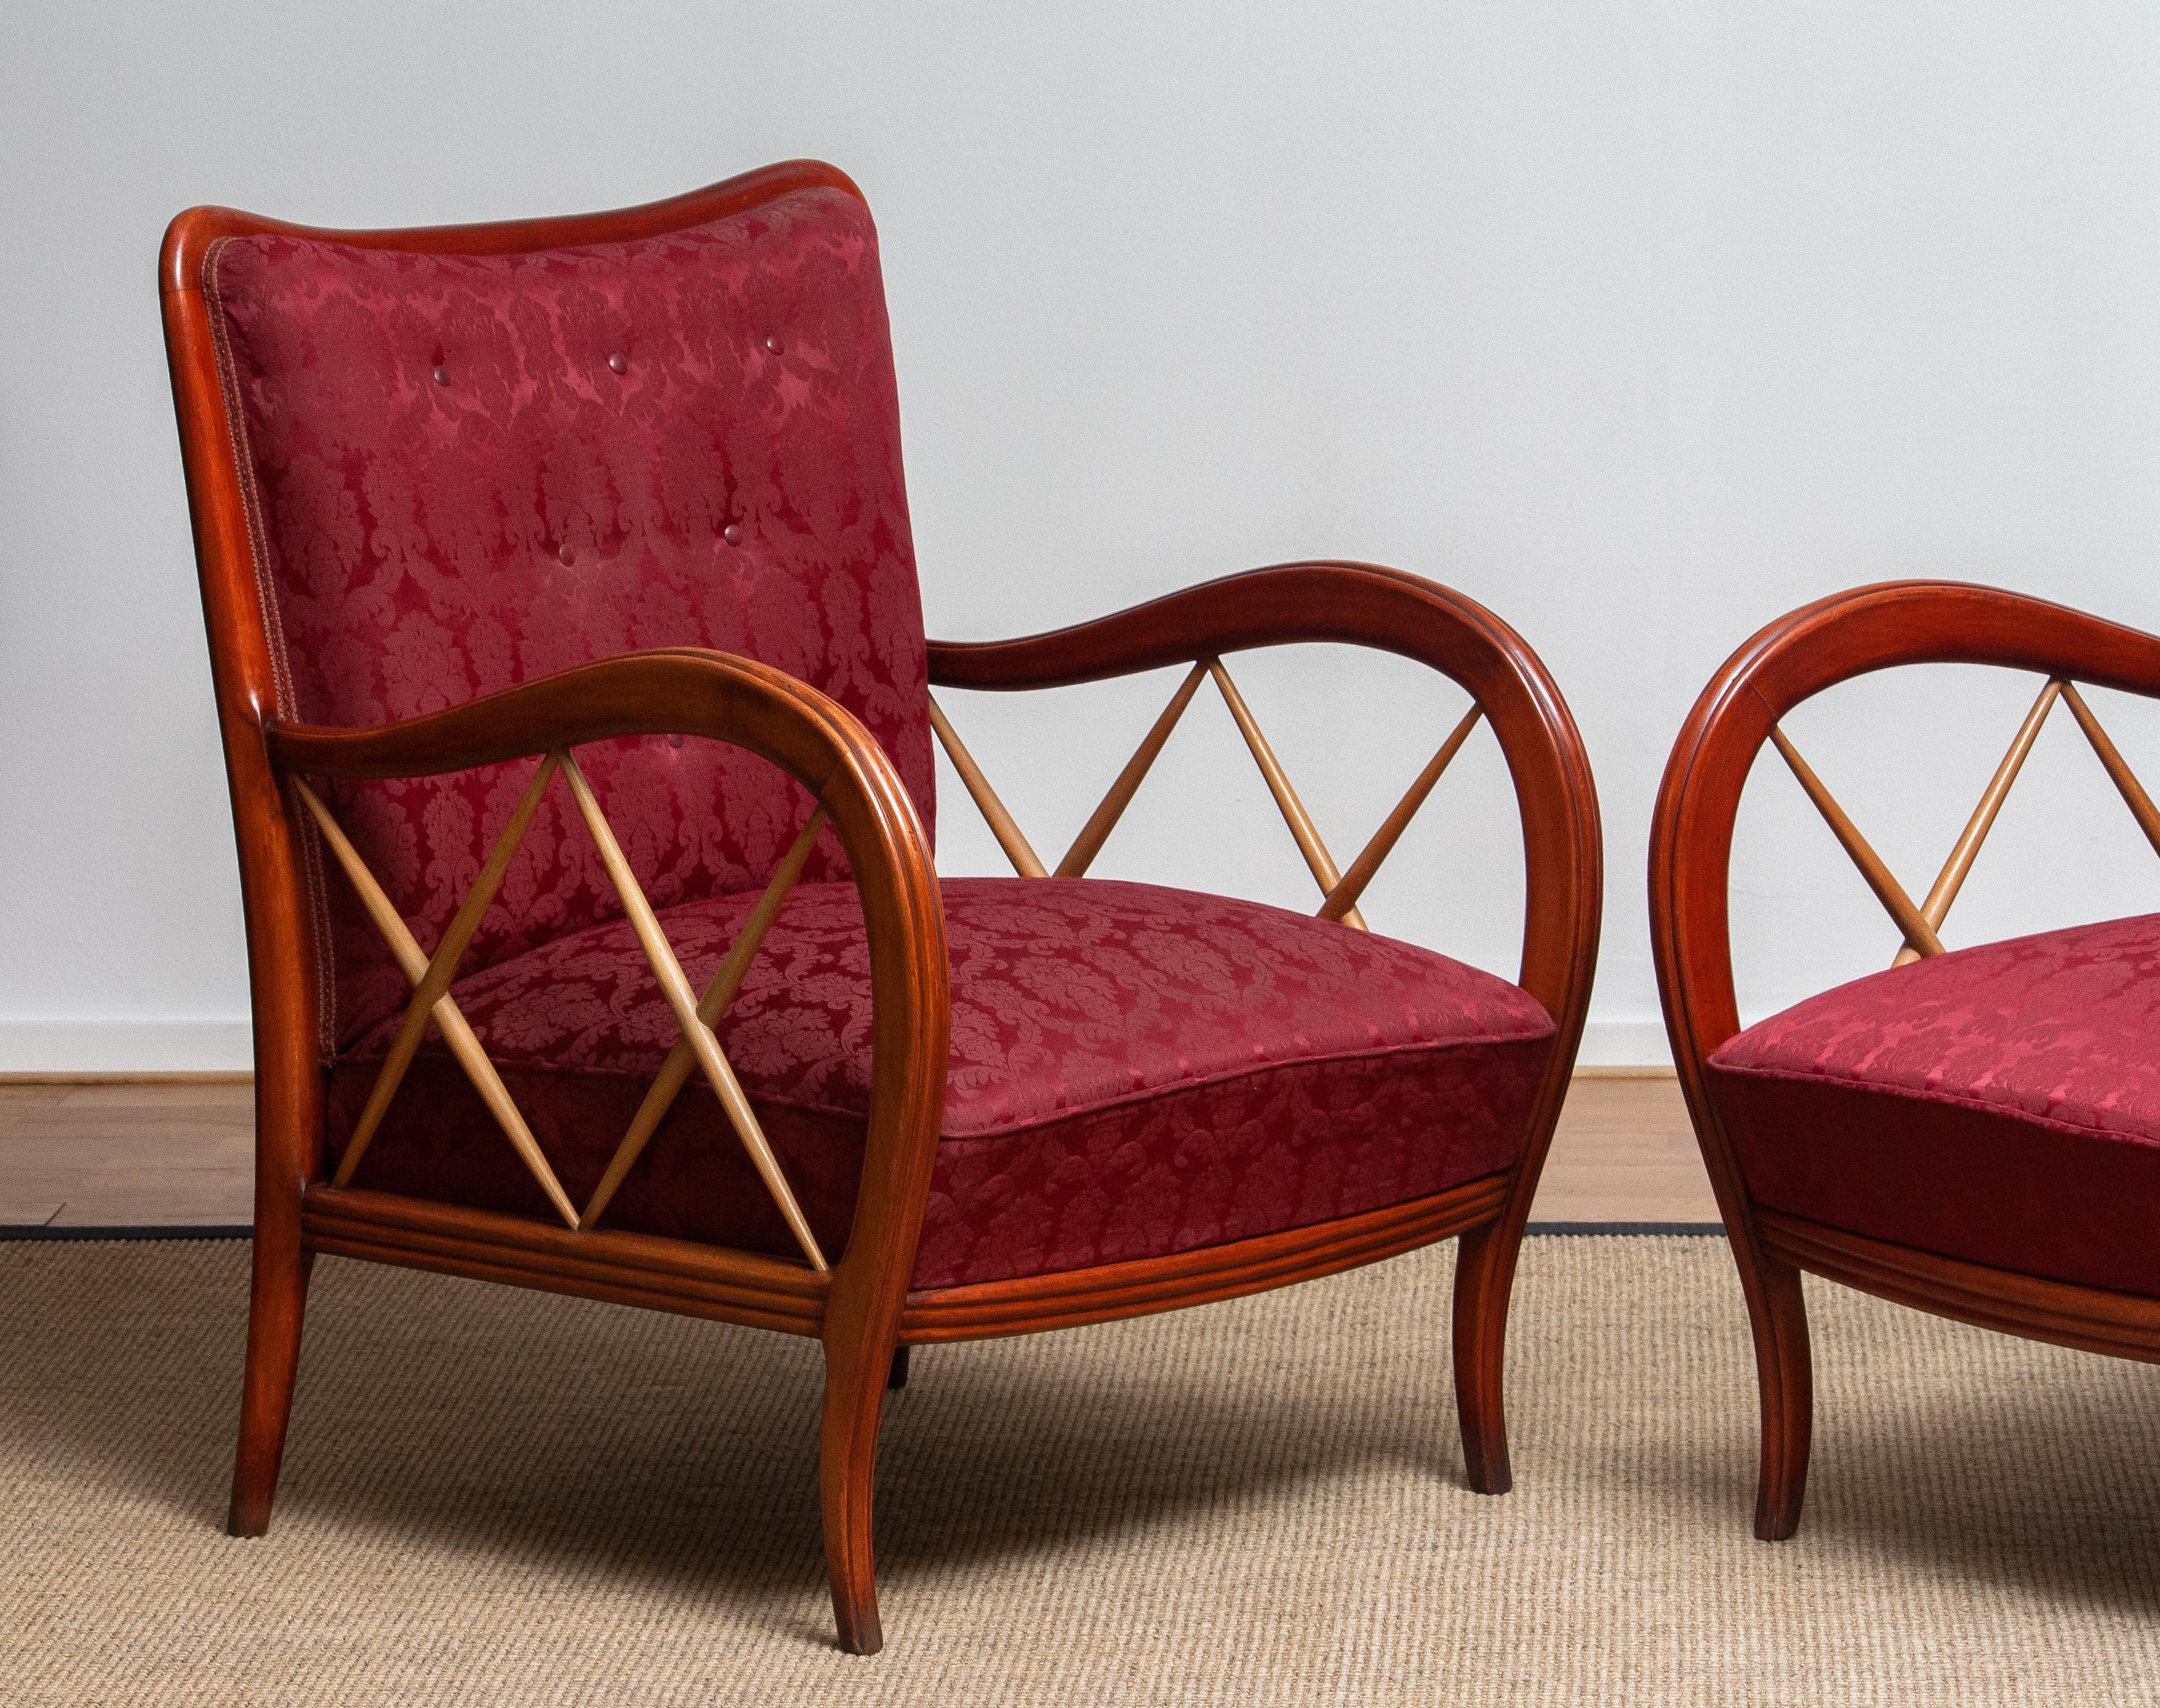 1940s Italian Pair of Paolo Buffa Lounge Chairs in Mahogany and Beech In Good Condition In Silvolde, Gelderland